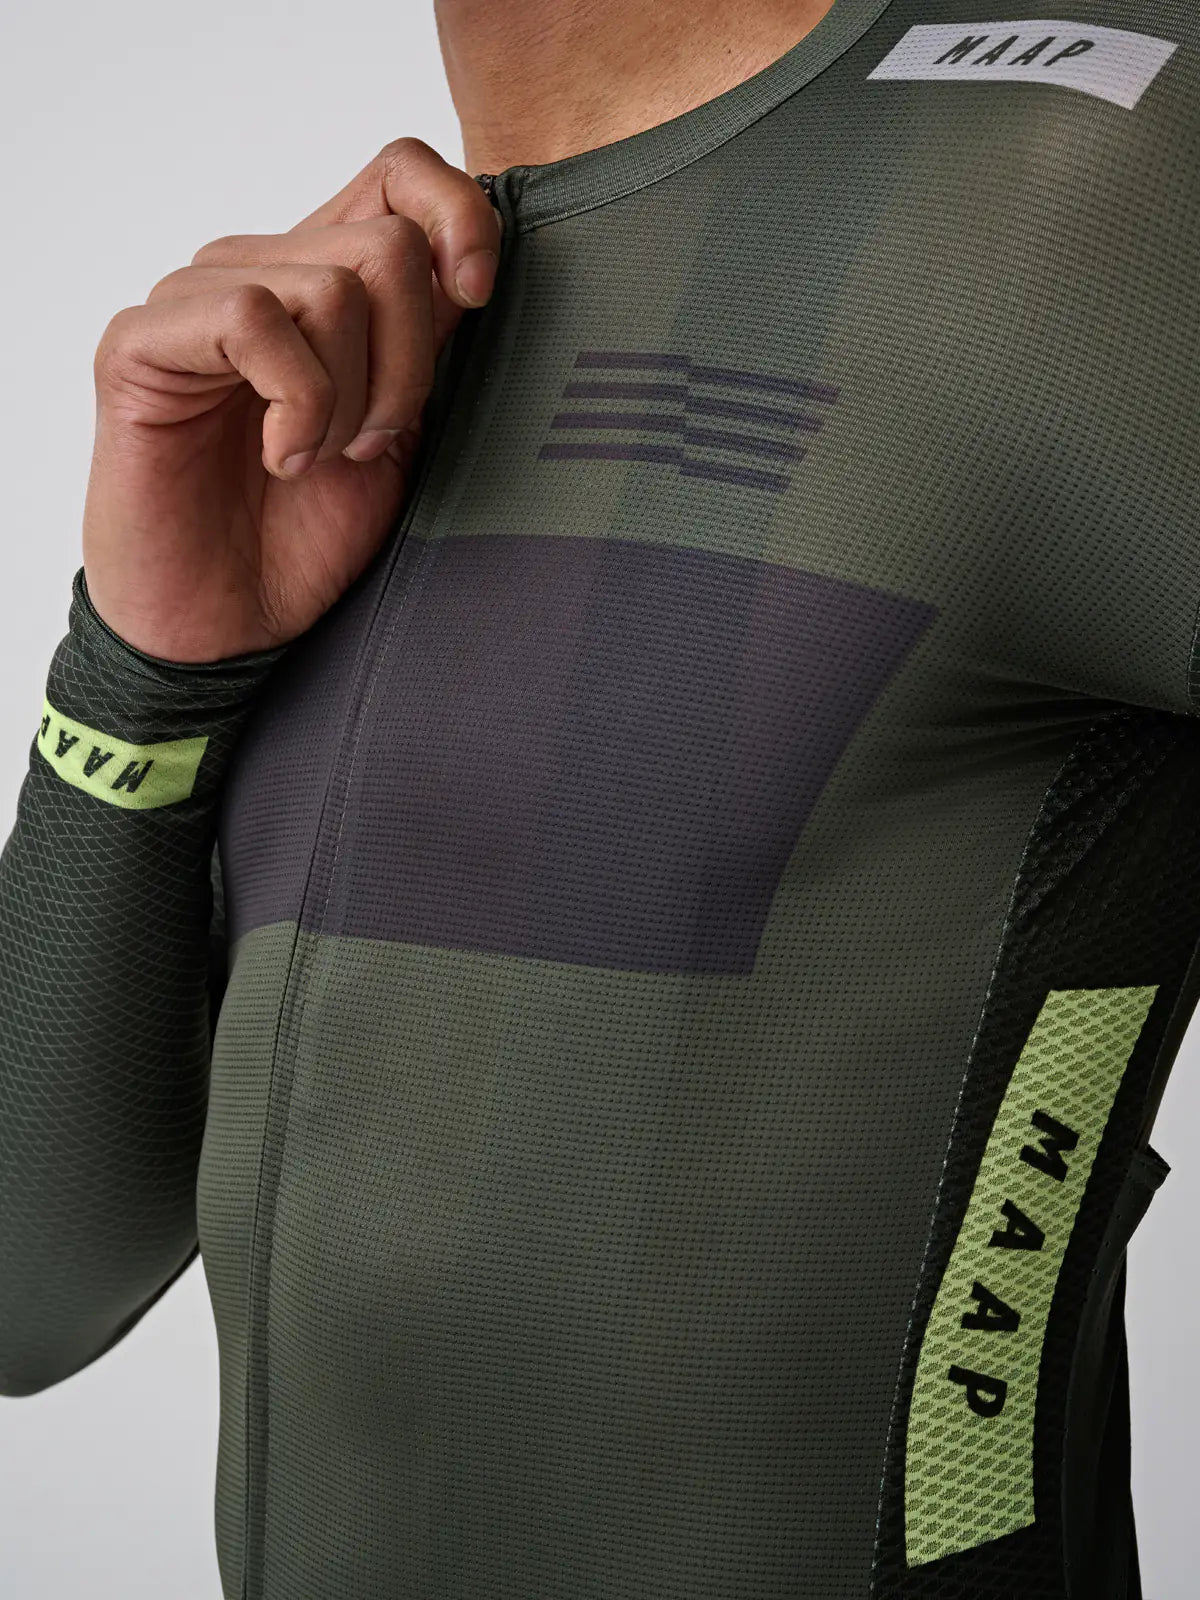 MAAP System Pro Air LS Jersey Bronze Green メンズ 長袖サイクルジャージ | CYCLISM